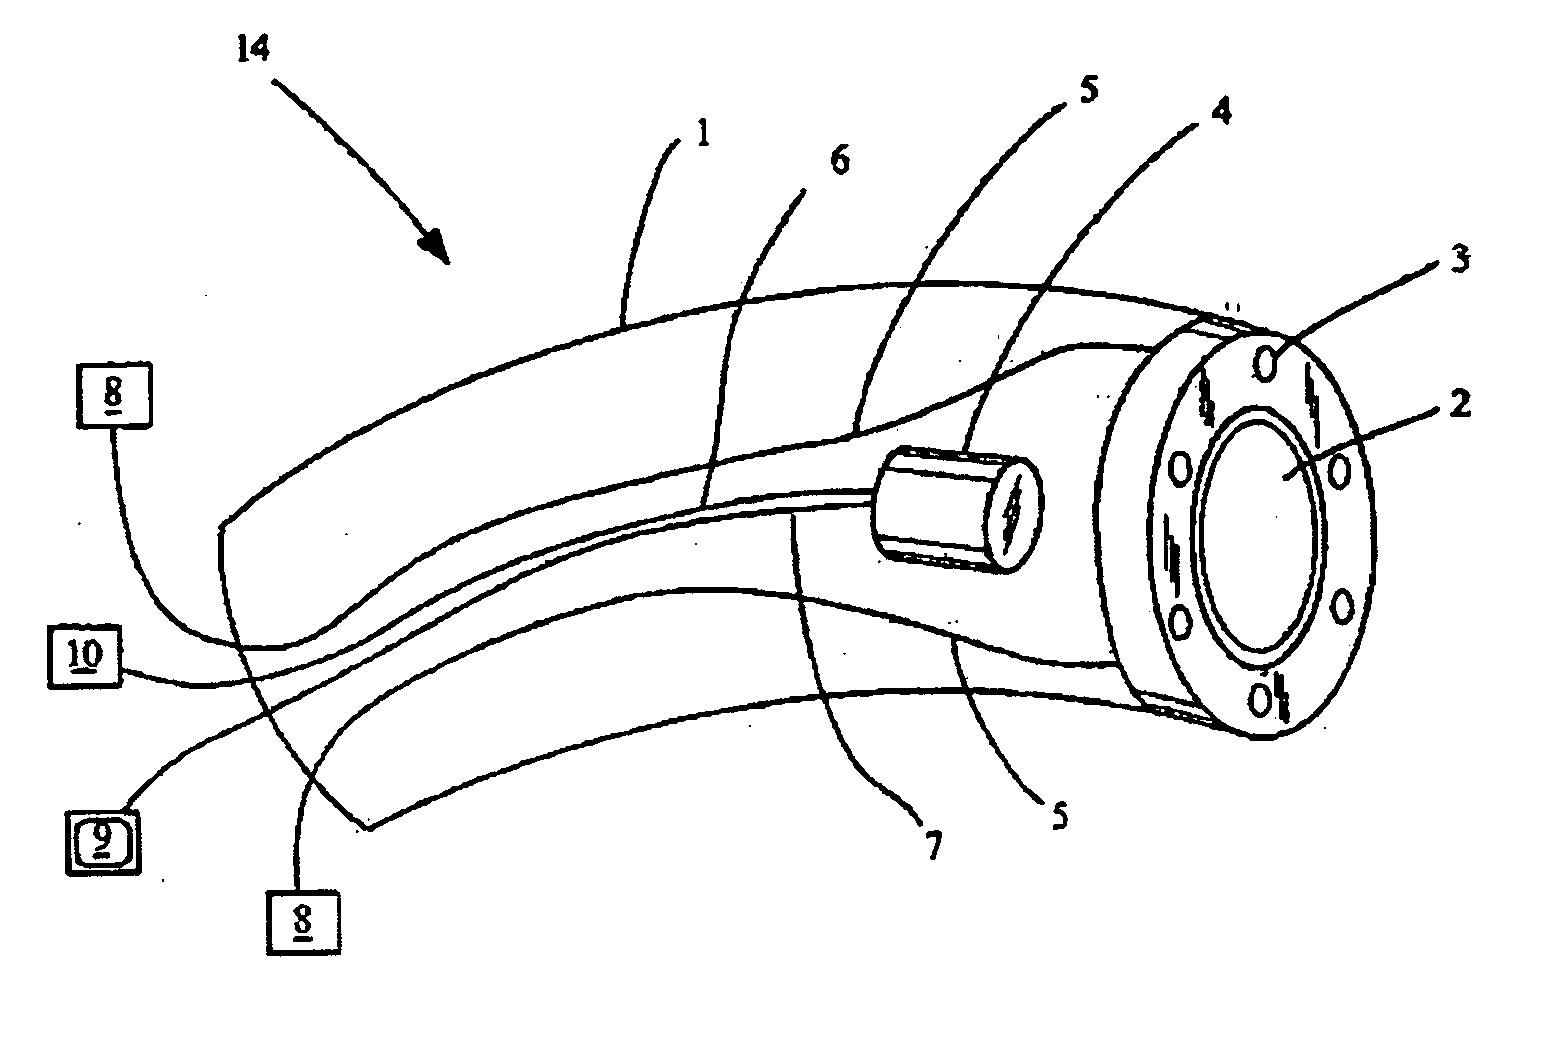 Visualization stylet for medical device applications having self-contained power source